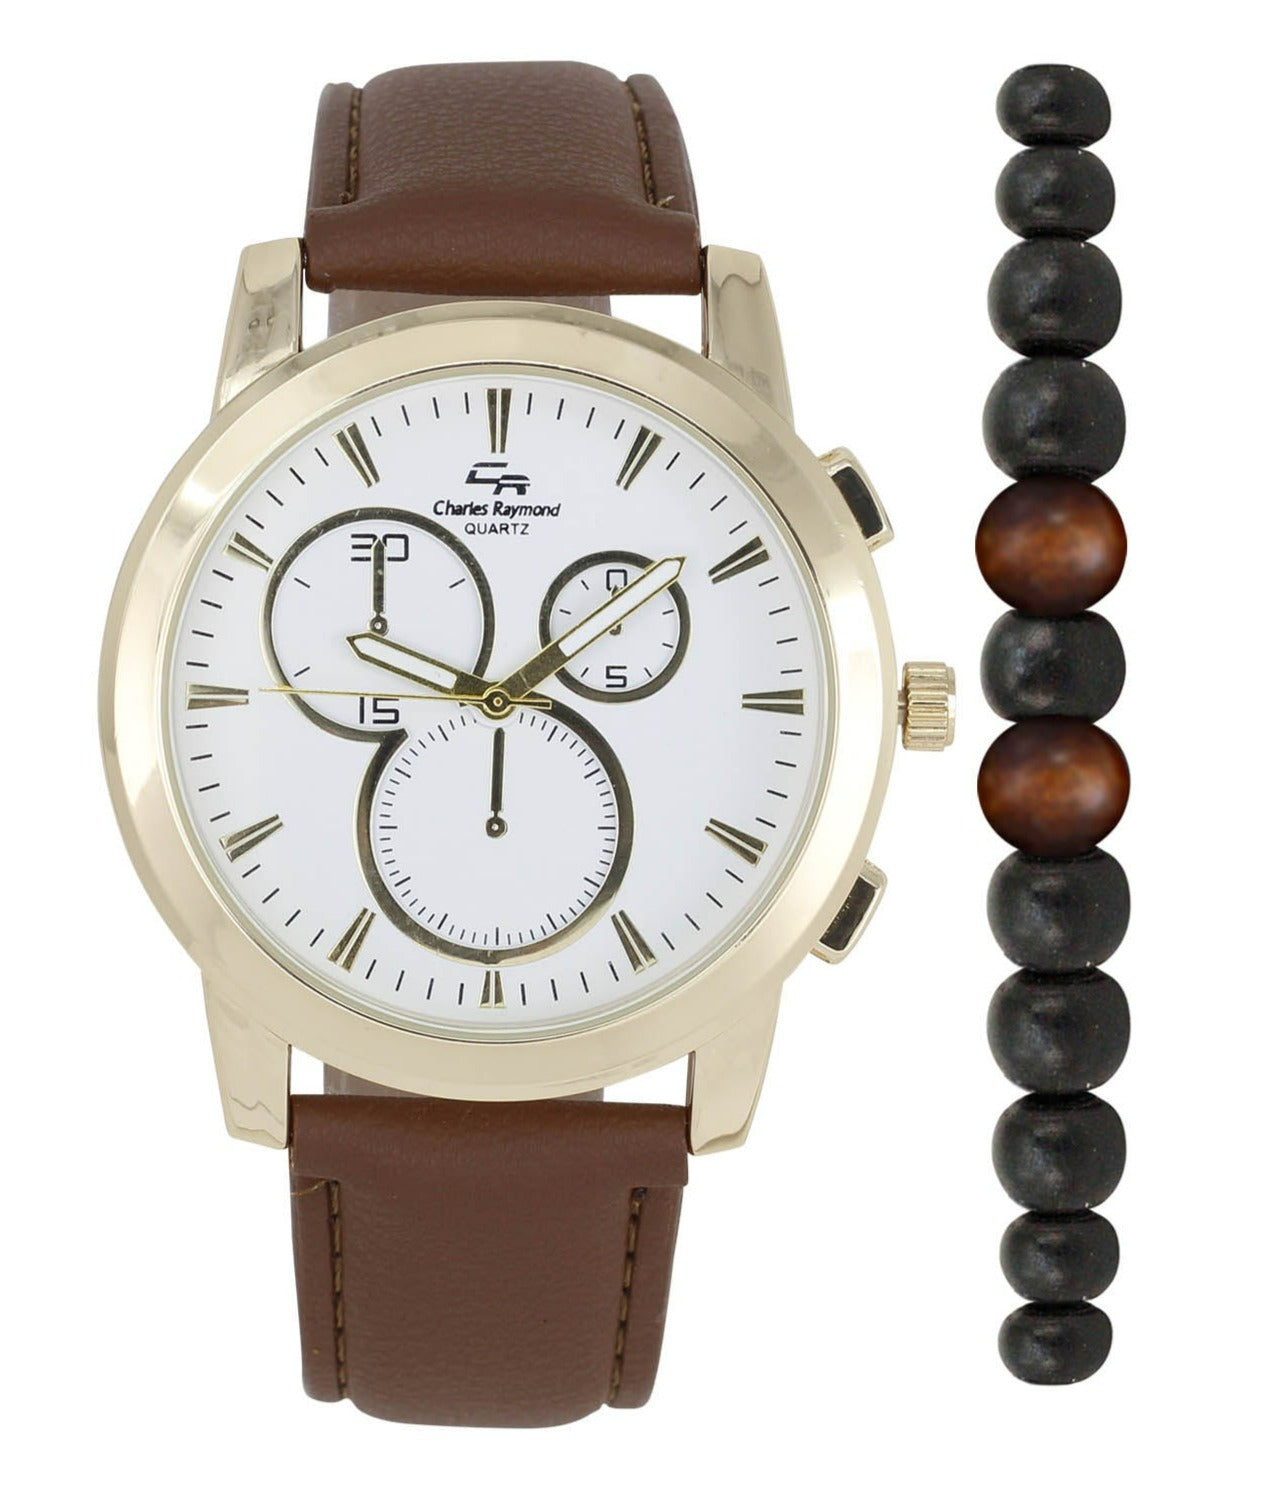 ST10548 Classic Leather Band Watch with Beaded Bracelet